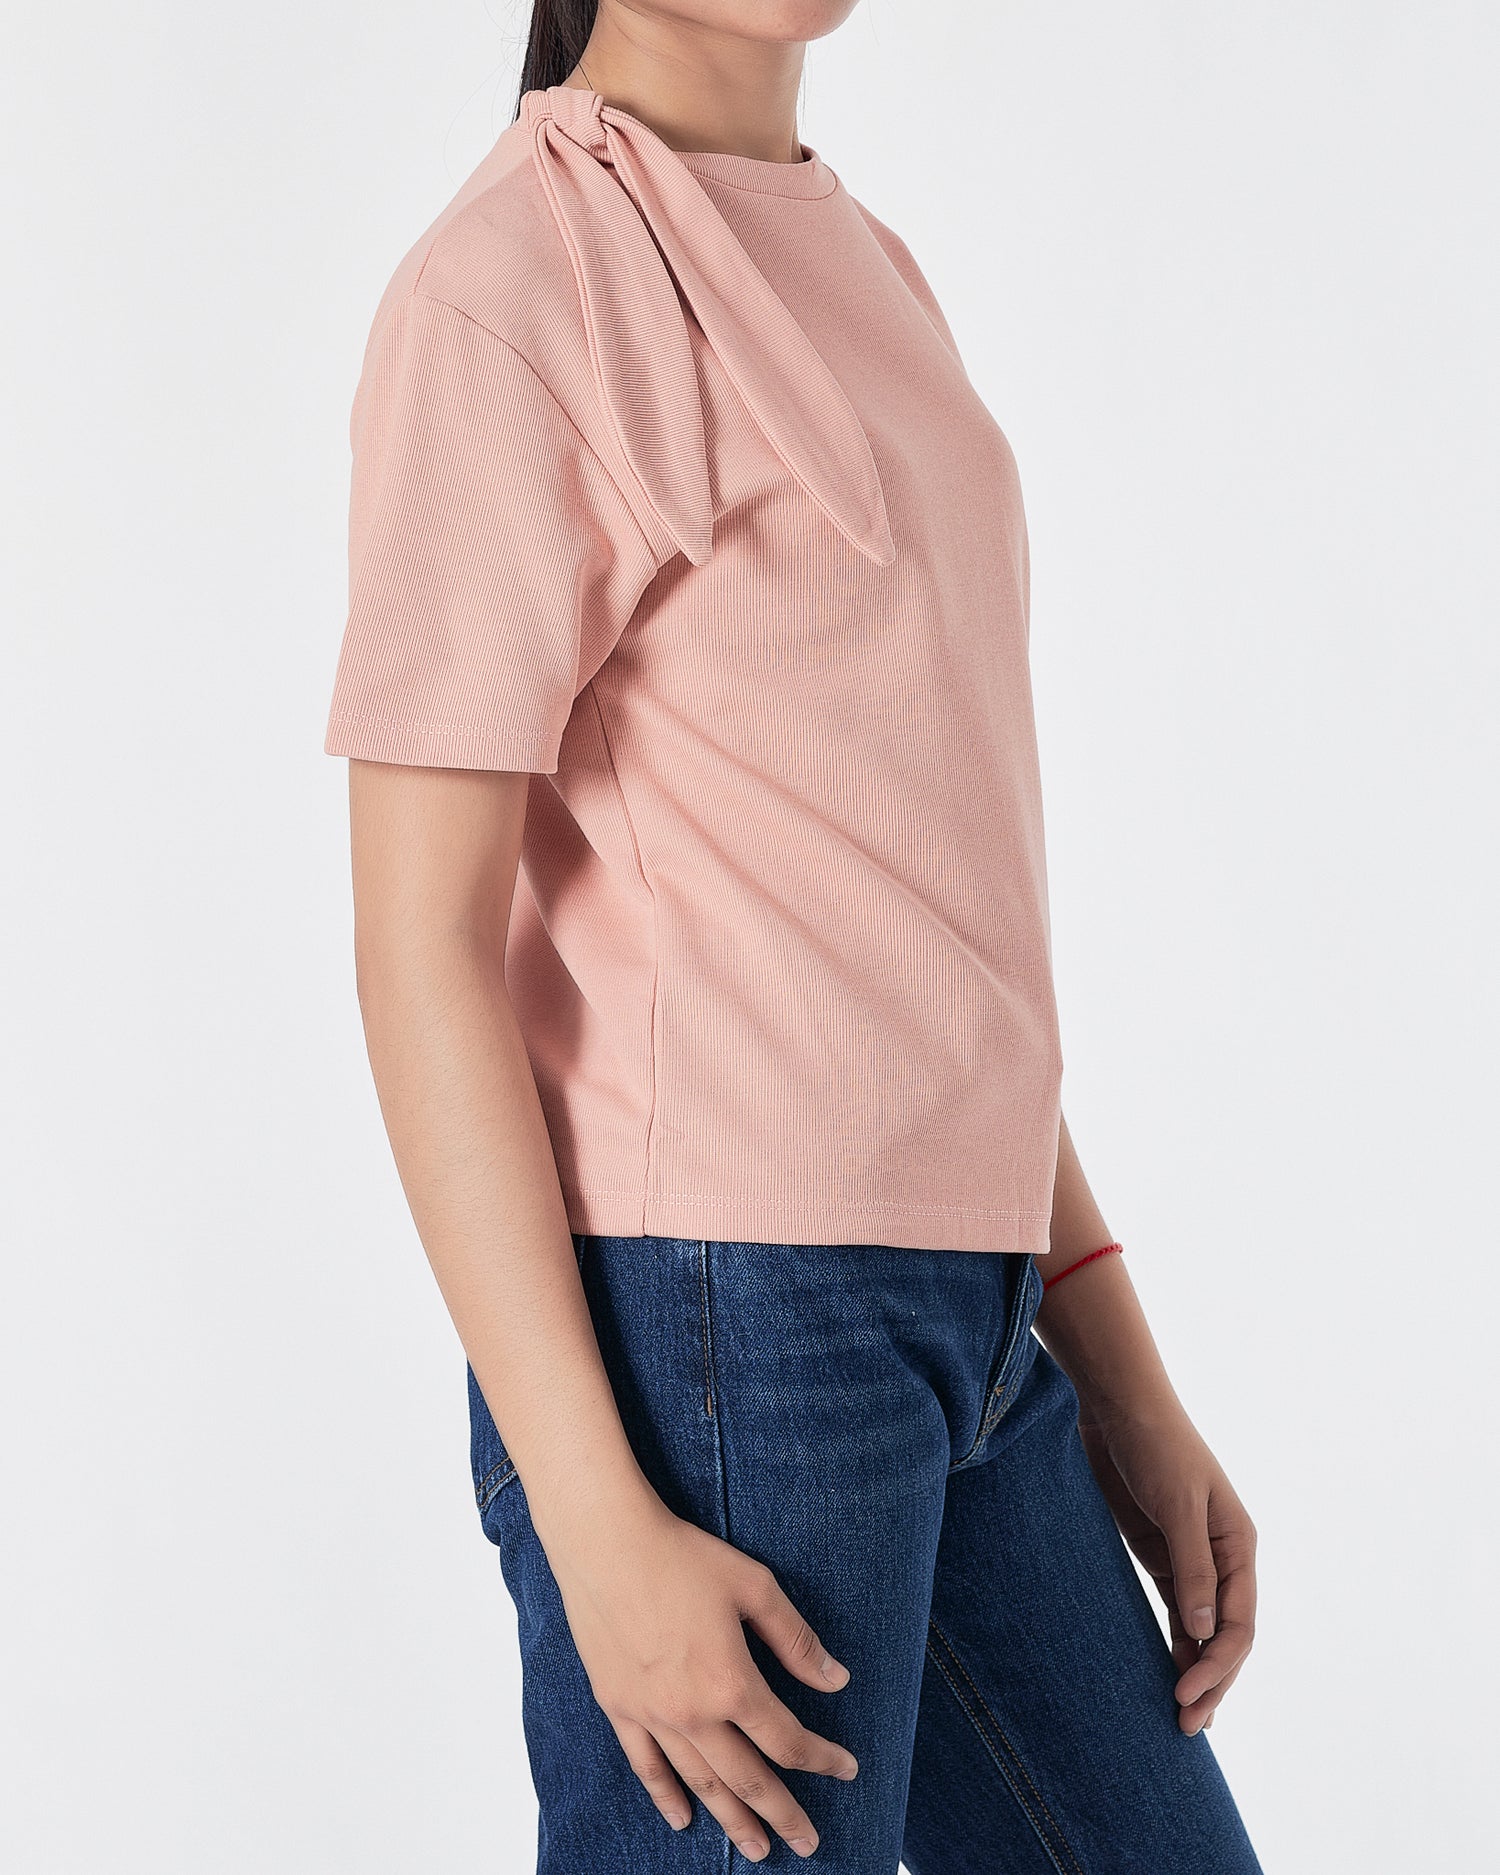 Tie Neck Pink Lady  T-Shirt 13.50